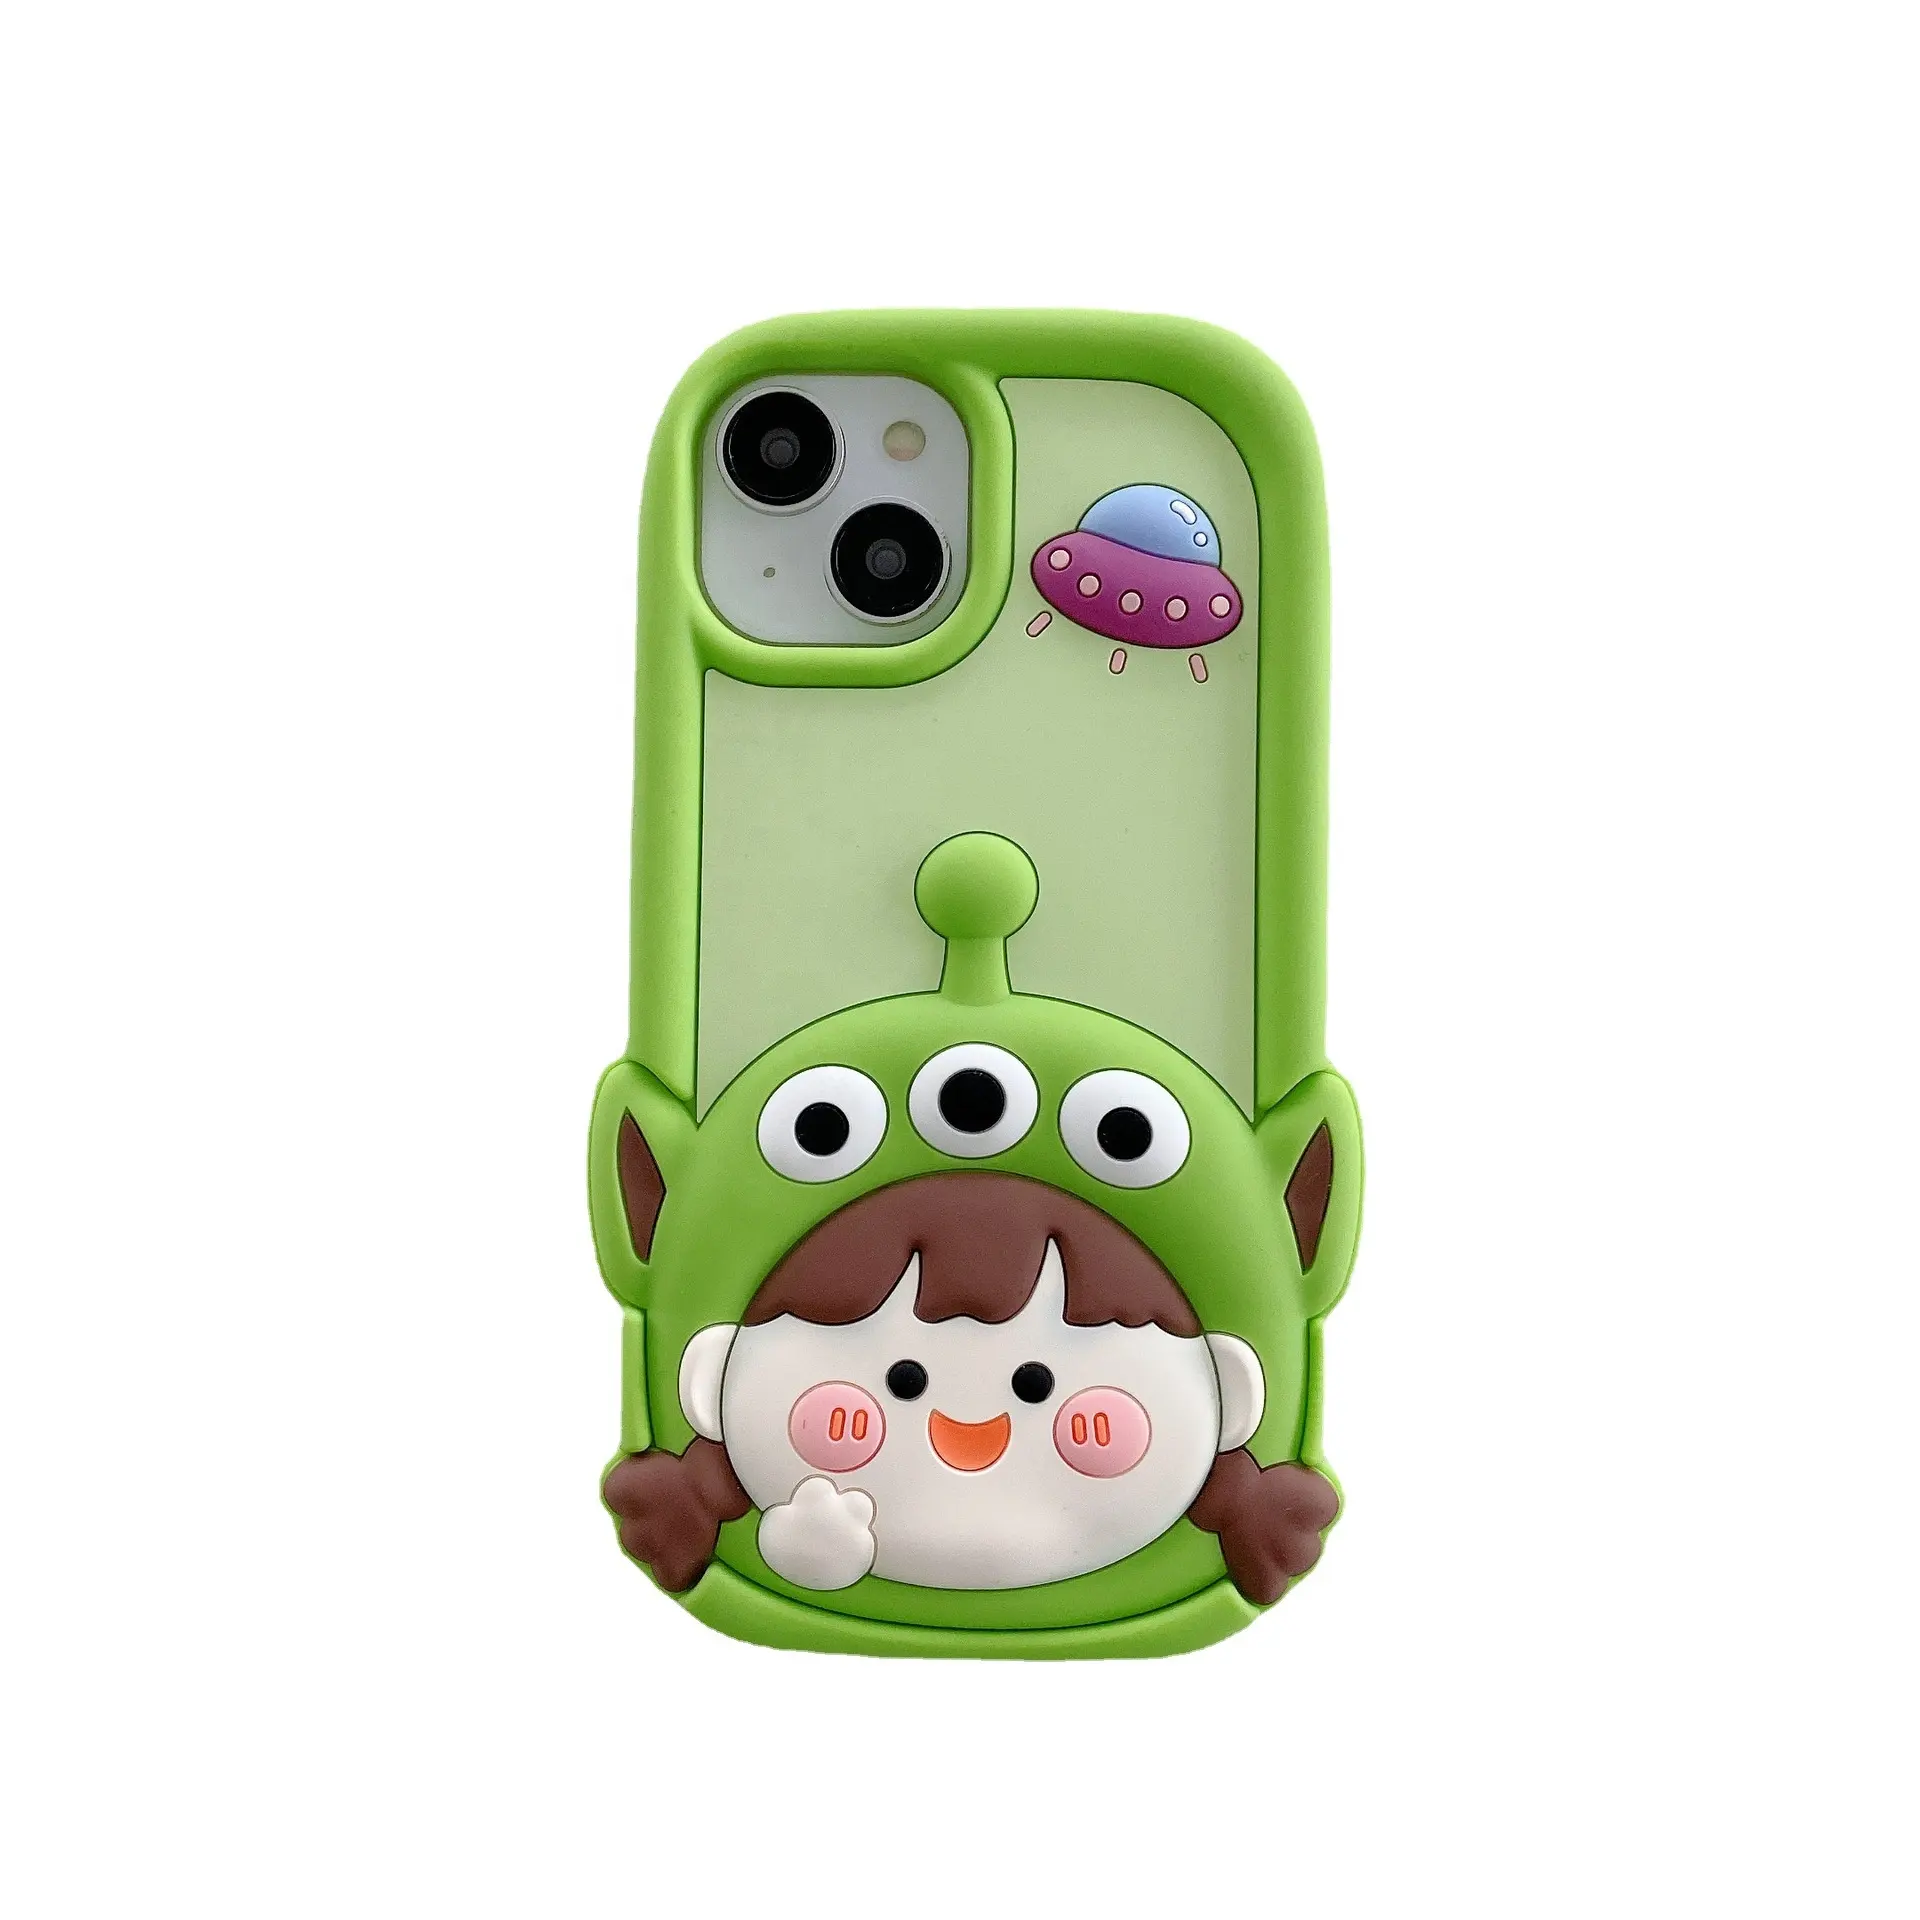 Japan South Korea Cute Silicone Three eyes Baby Girl Silicone Mobile Phone Accessories Cover Case For iPhone 12 13 14 15 Pro Max